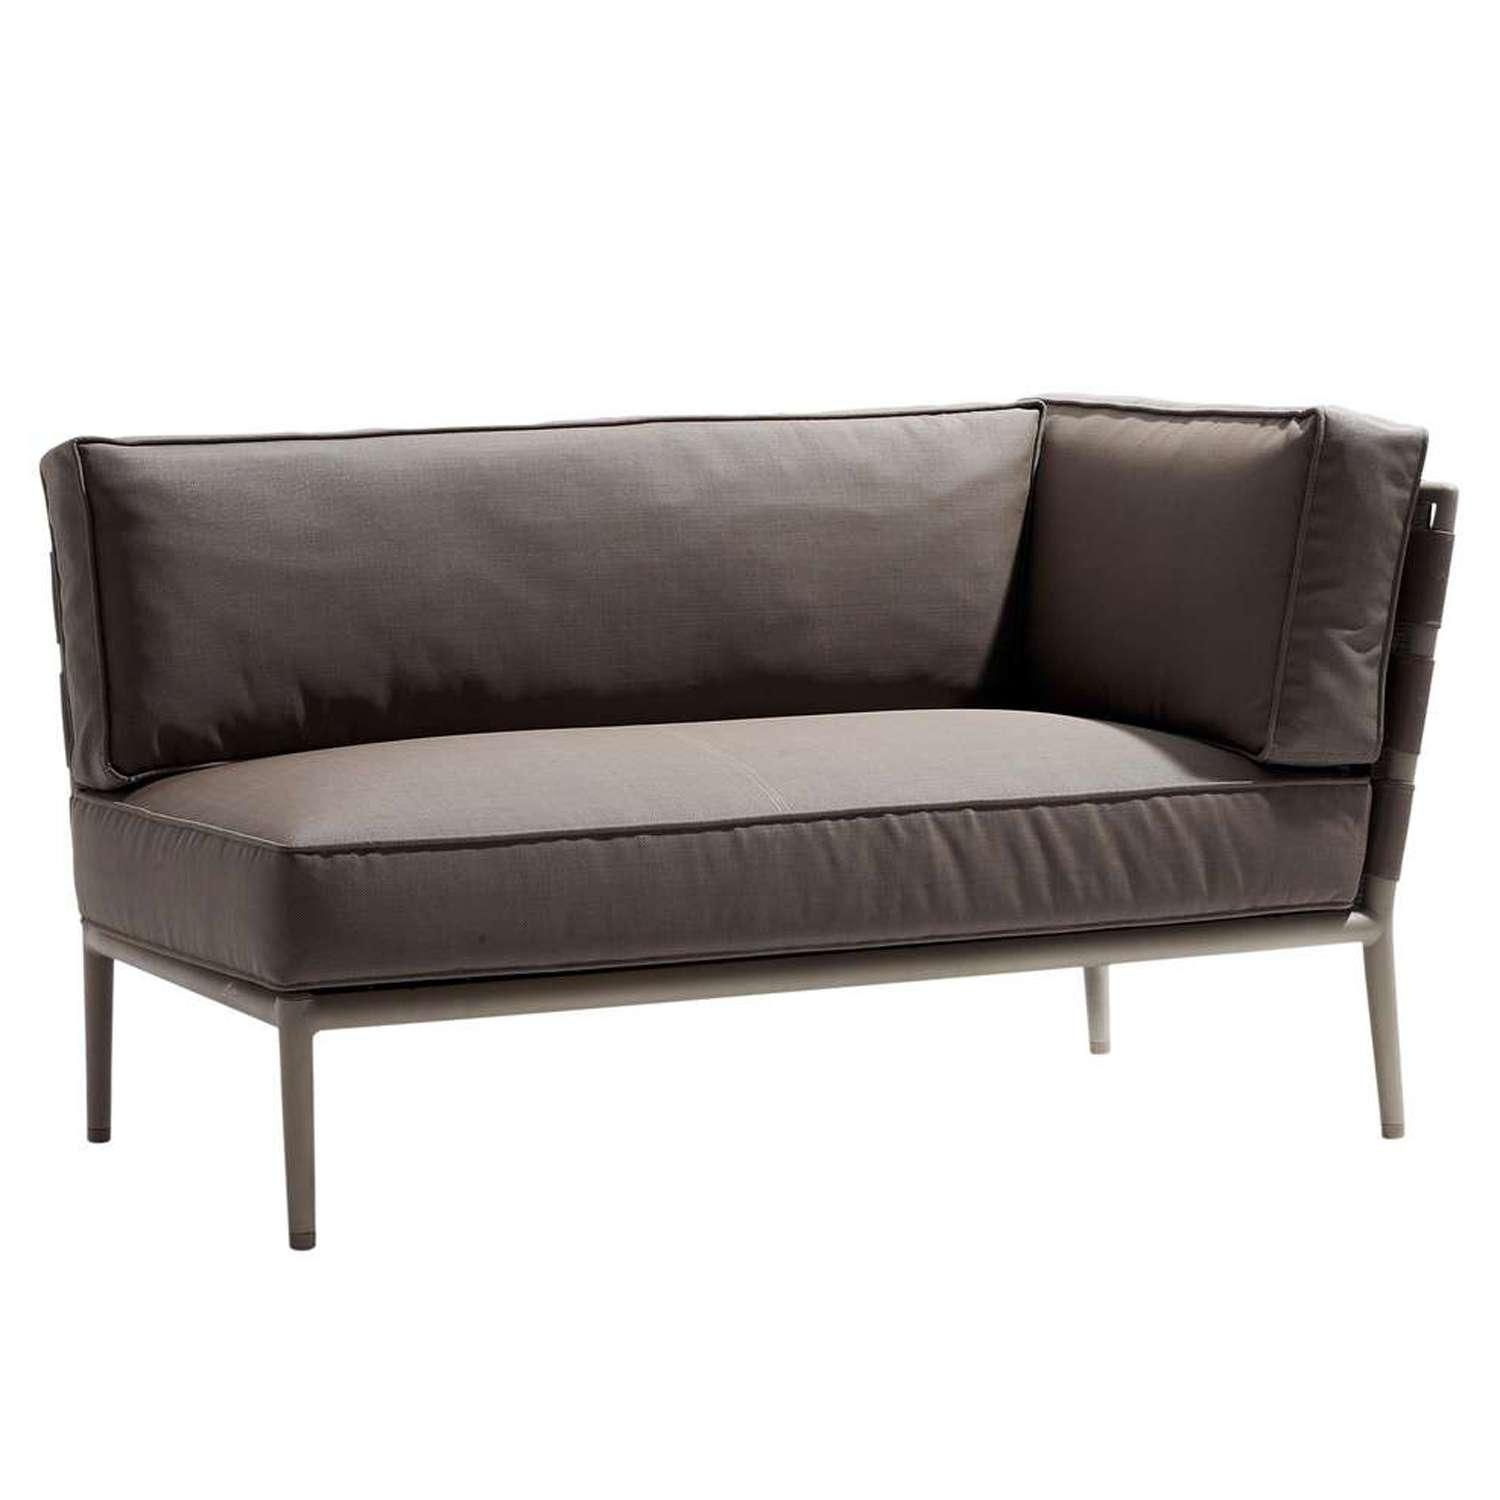 Sofas : Fabulous Single Seater Sofa Designs Single Chair Bed One Pertaining To Cushion Sofa Beds (View 15 of 23)